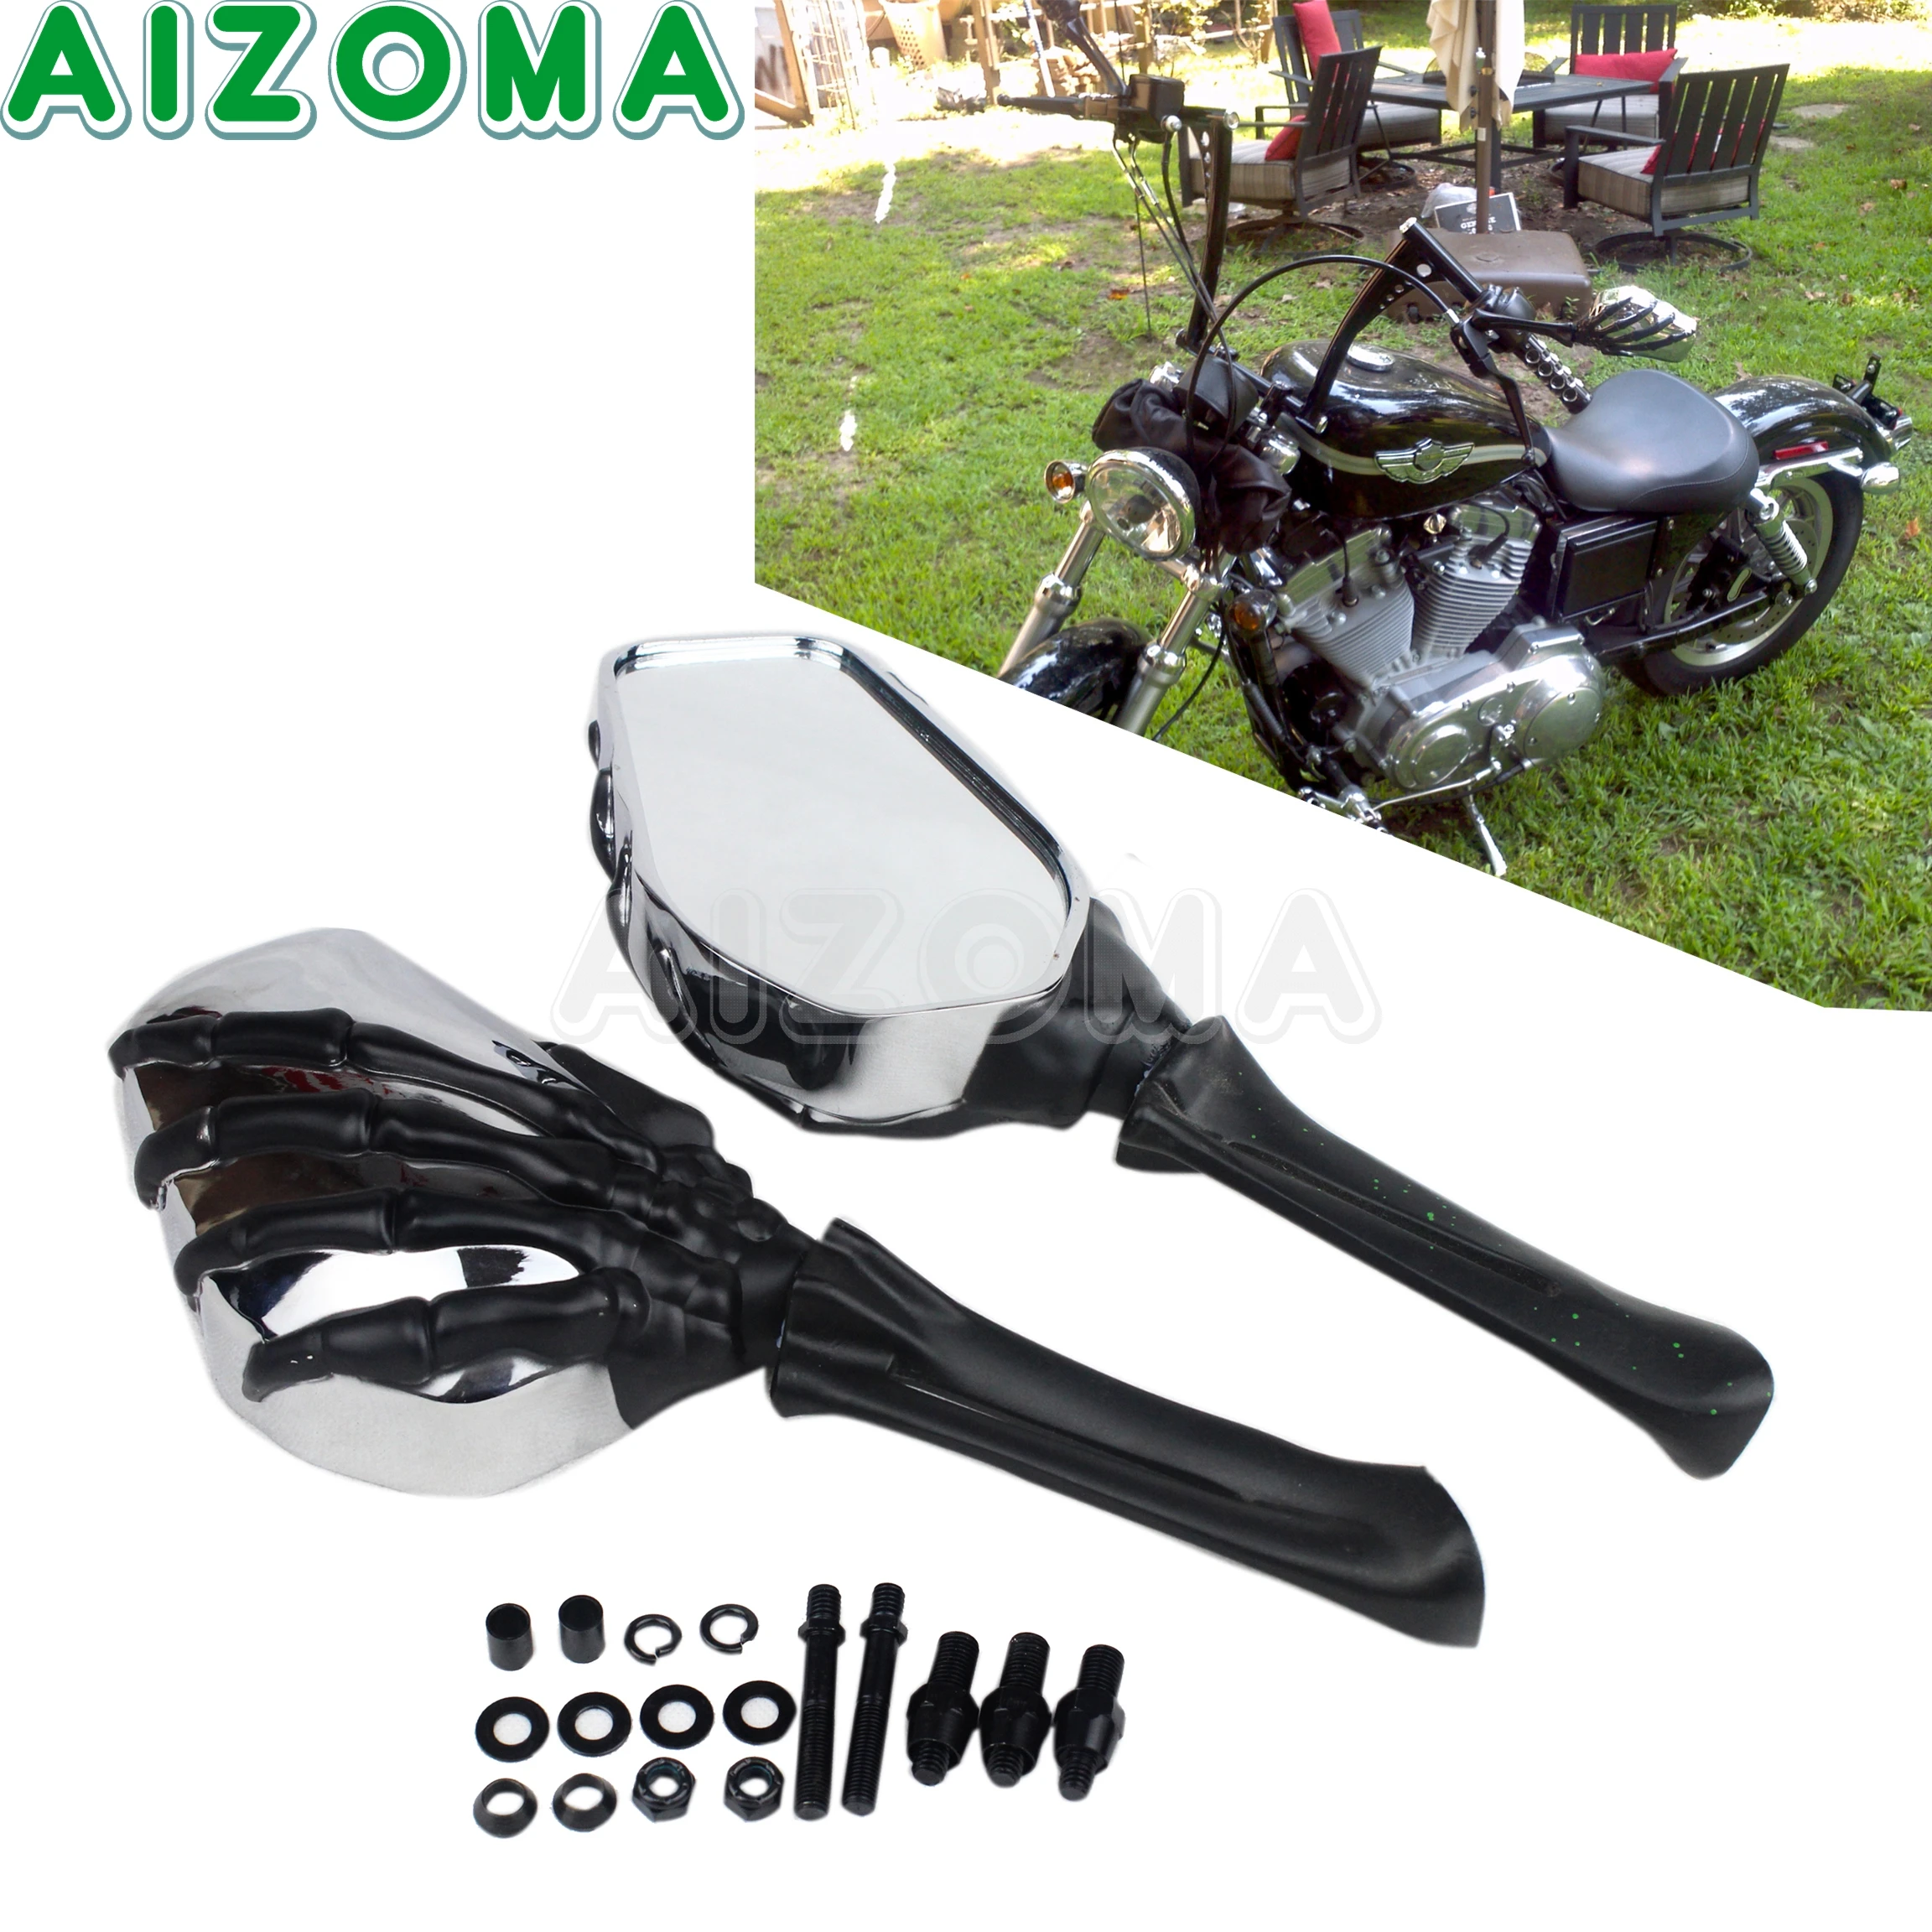 Black Motorcycle Skeleton Hand Rear View Mirrors For Harley Davidson Road King A 